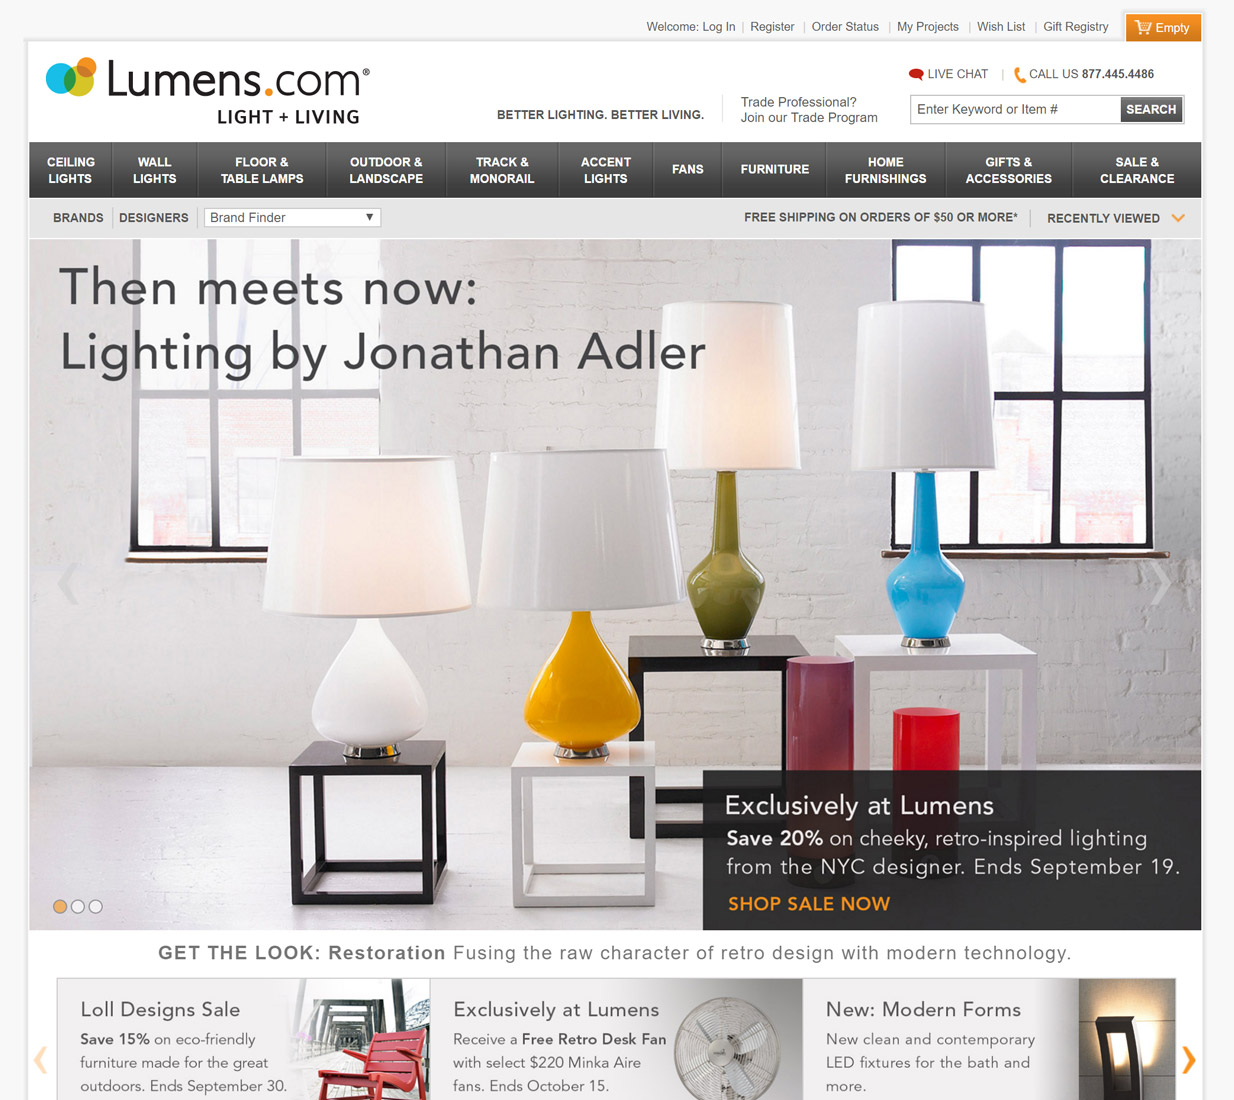 Lumens Demandware Onboarding and Launch